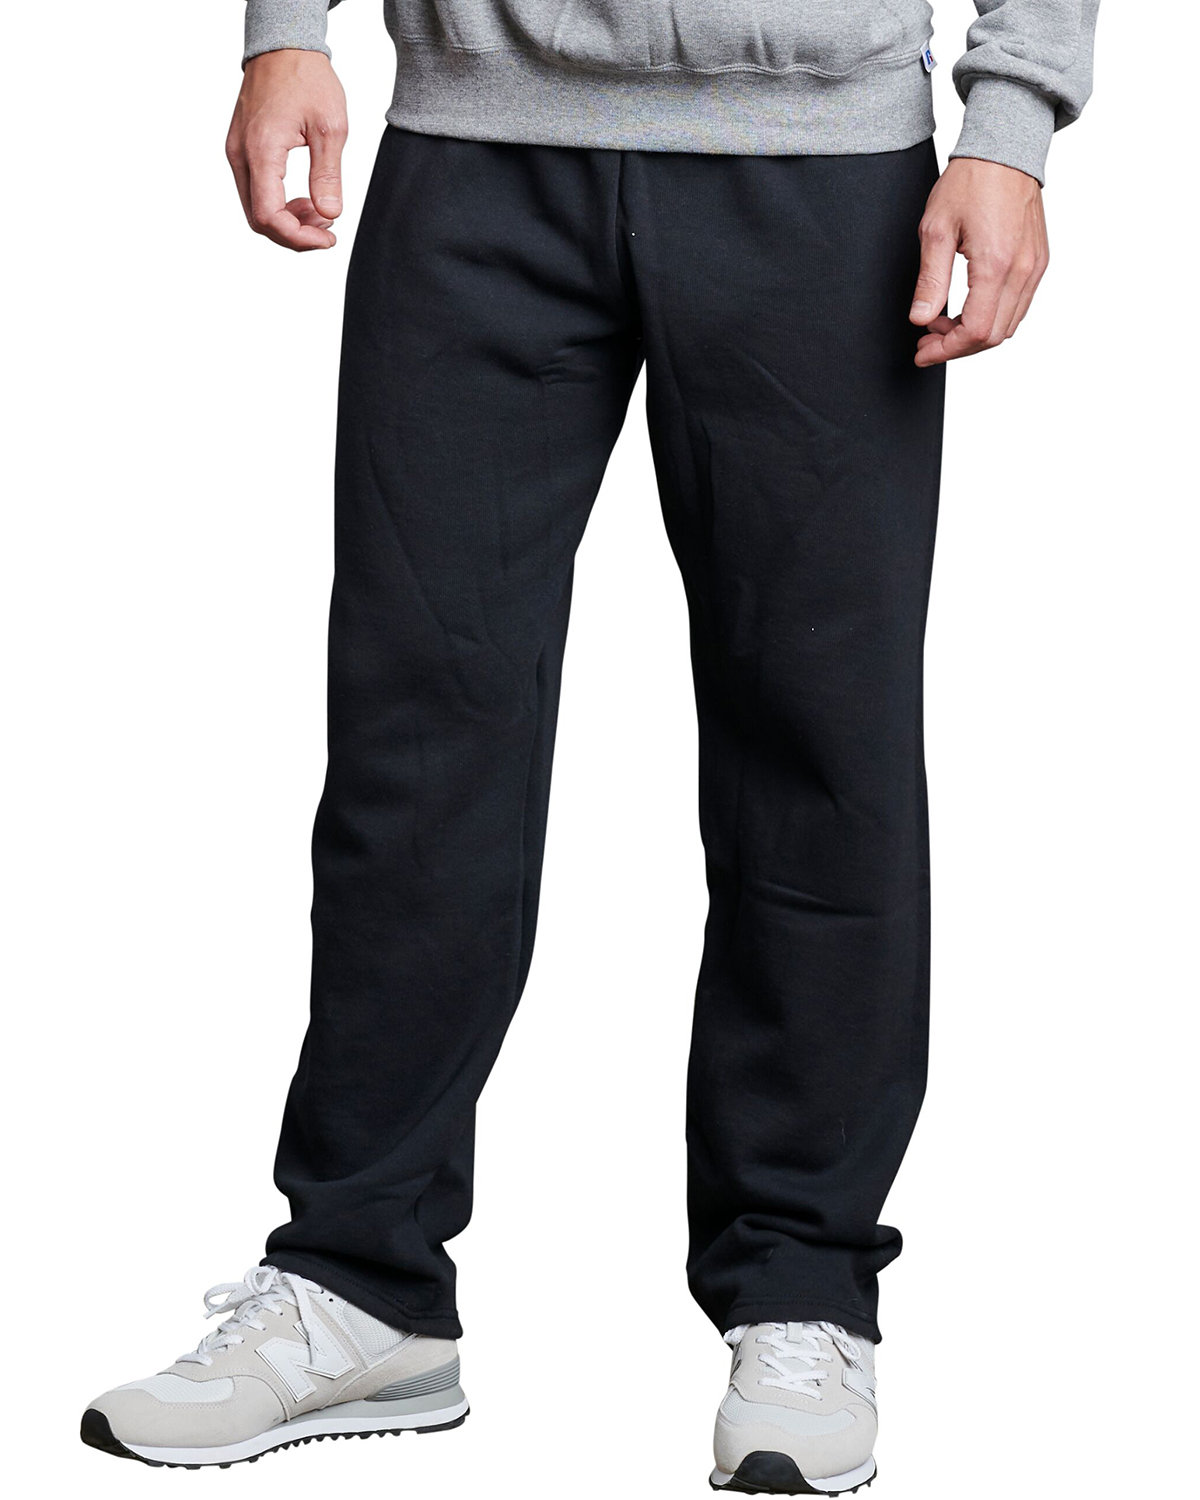 Russell Athletic Adult Dri-Power® Open-Bottom Sweatpant BLACK 